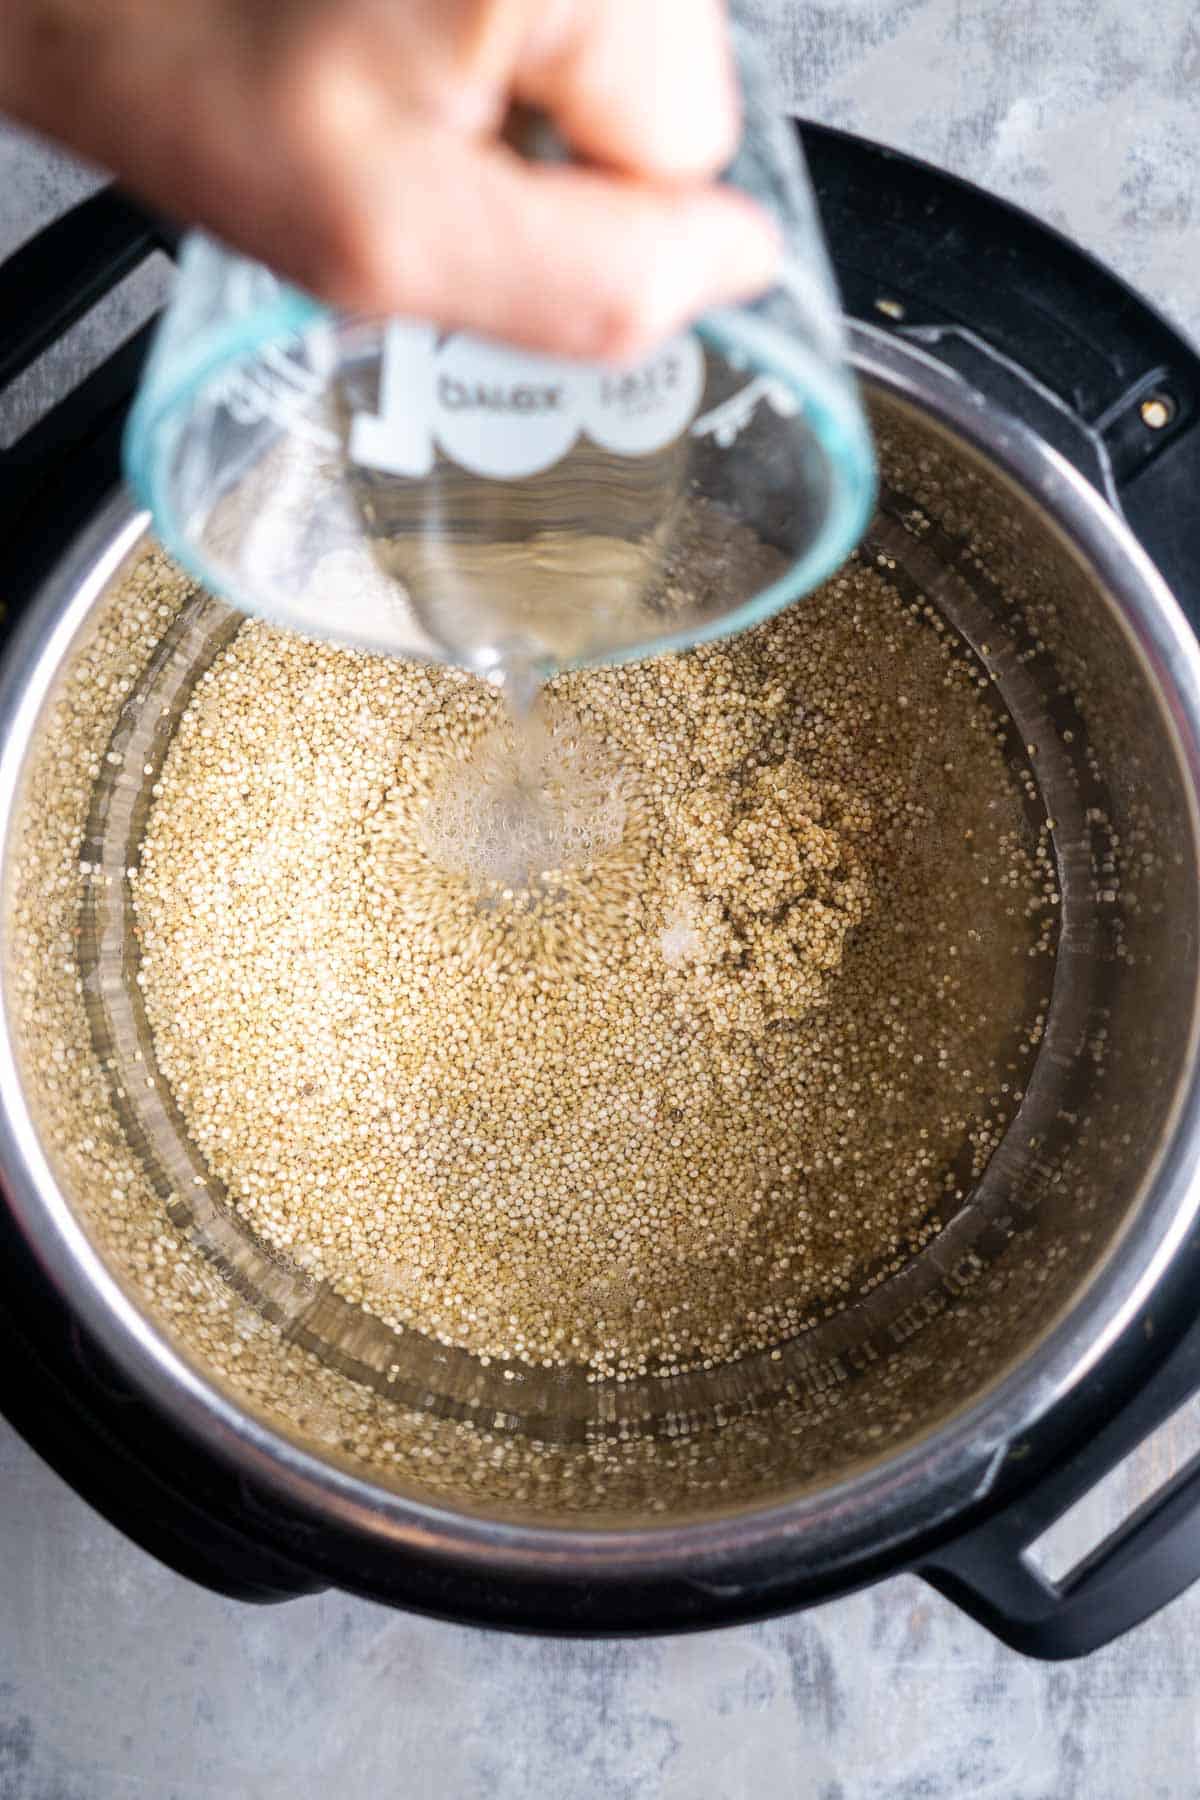 water is being added to uncooked quinoa in the Instant Pot